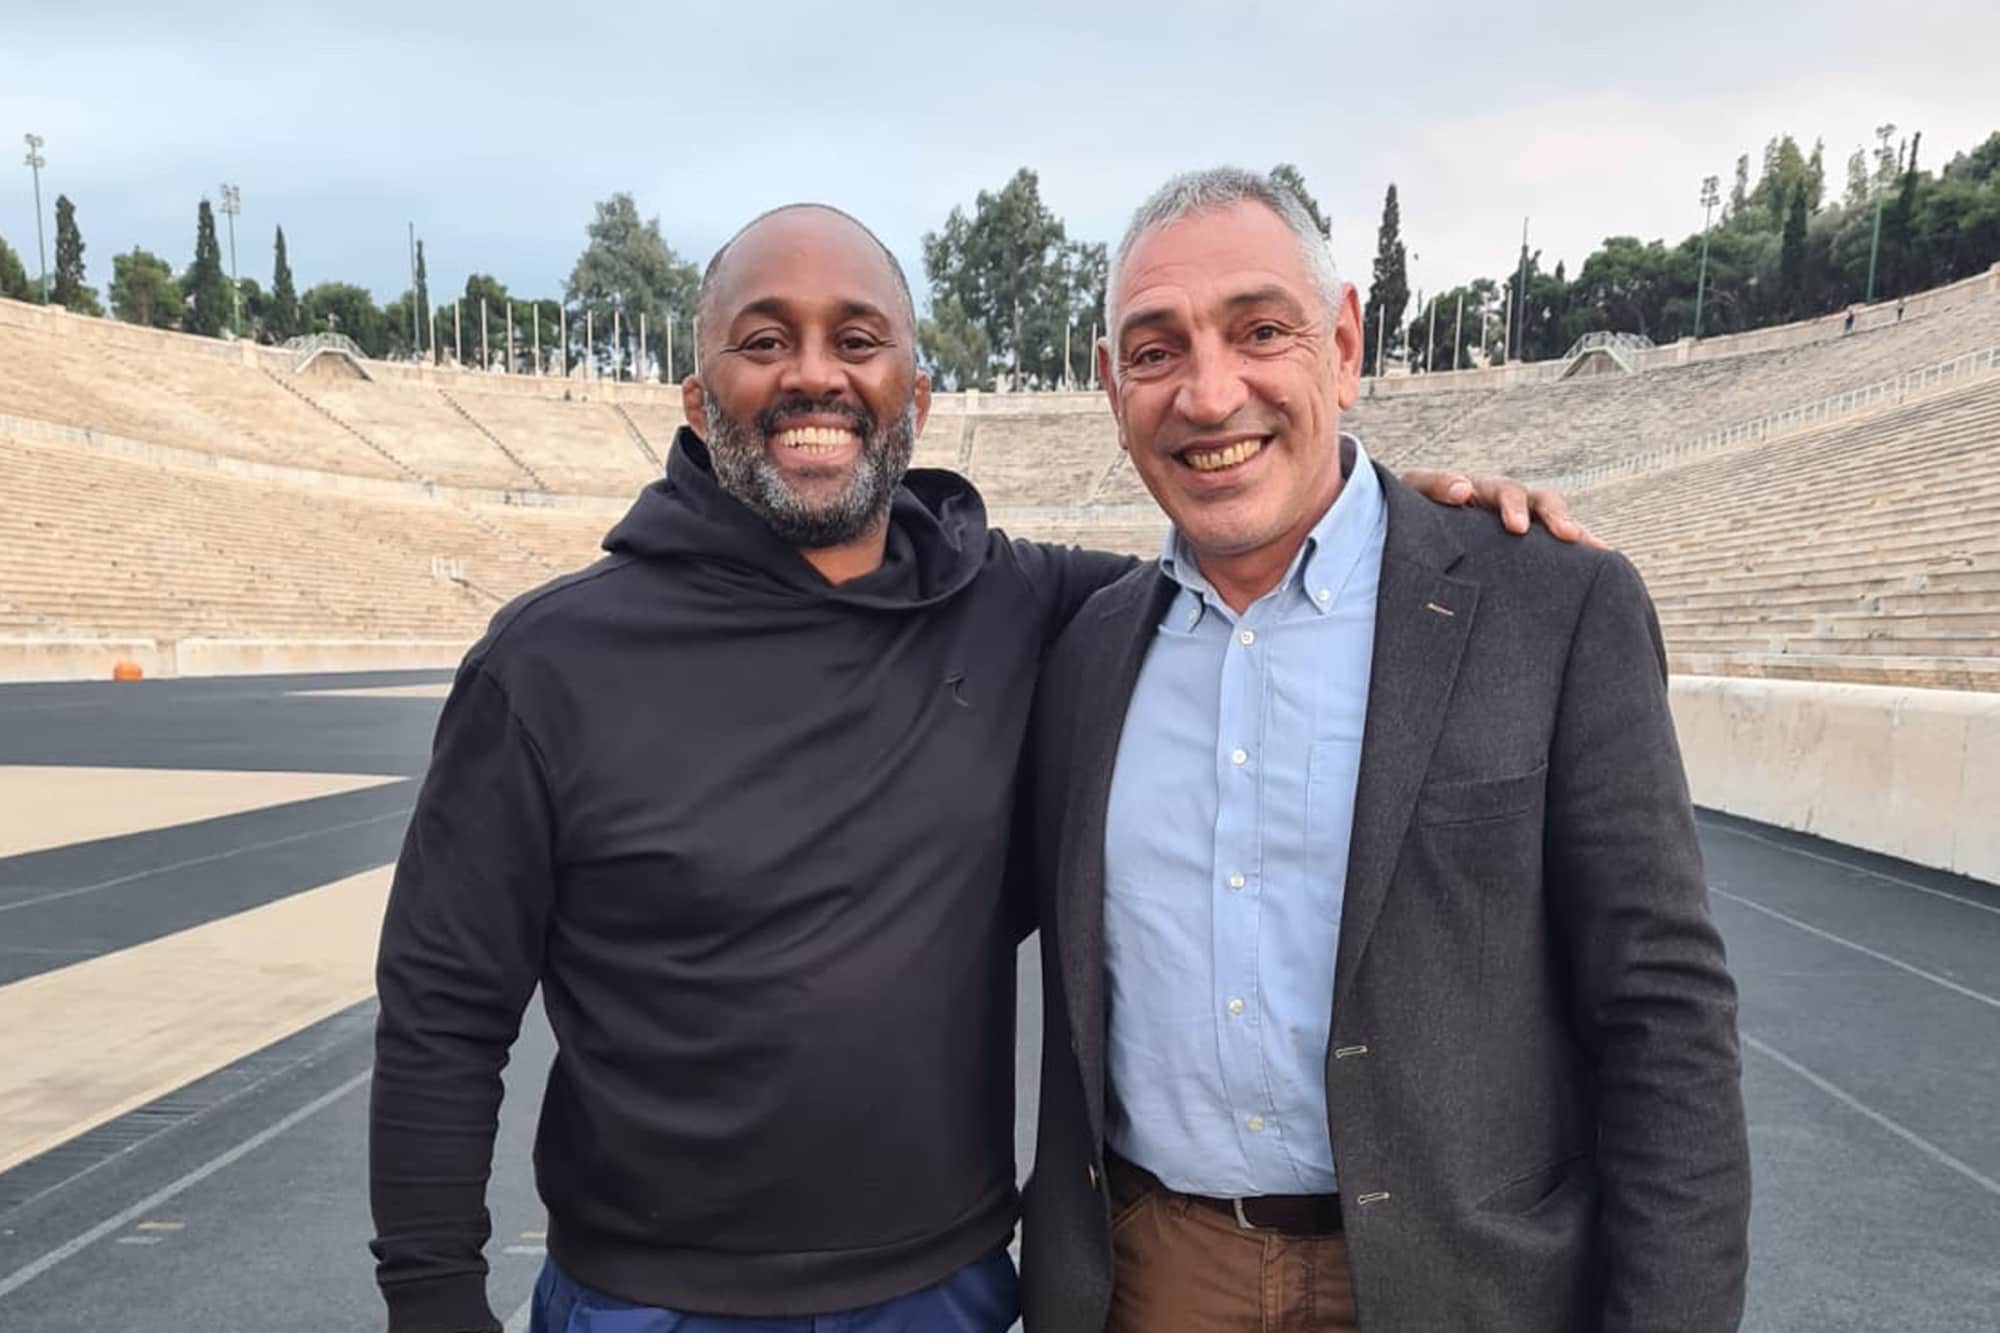 IMMAF President Kerrith Brown travels to Greece to continue global development mission